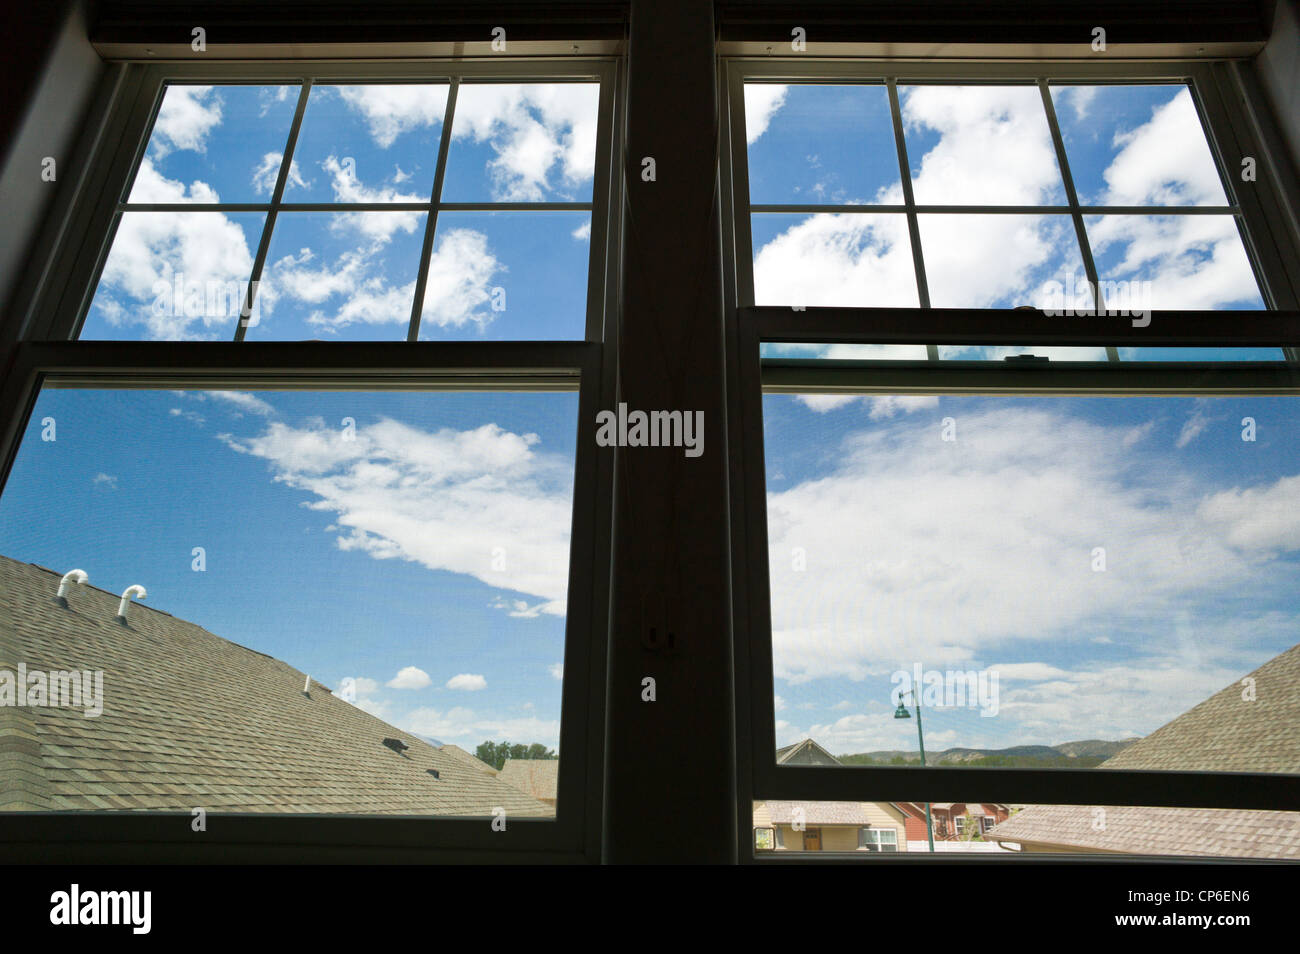 View of sky and clouds through the windows of a home office. Stock Photo